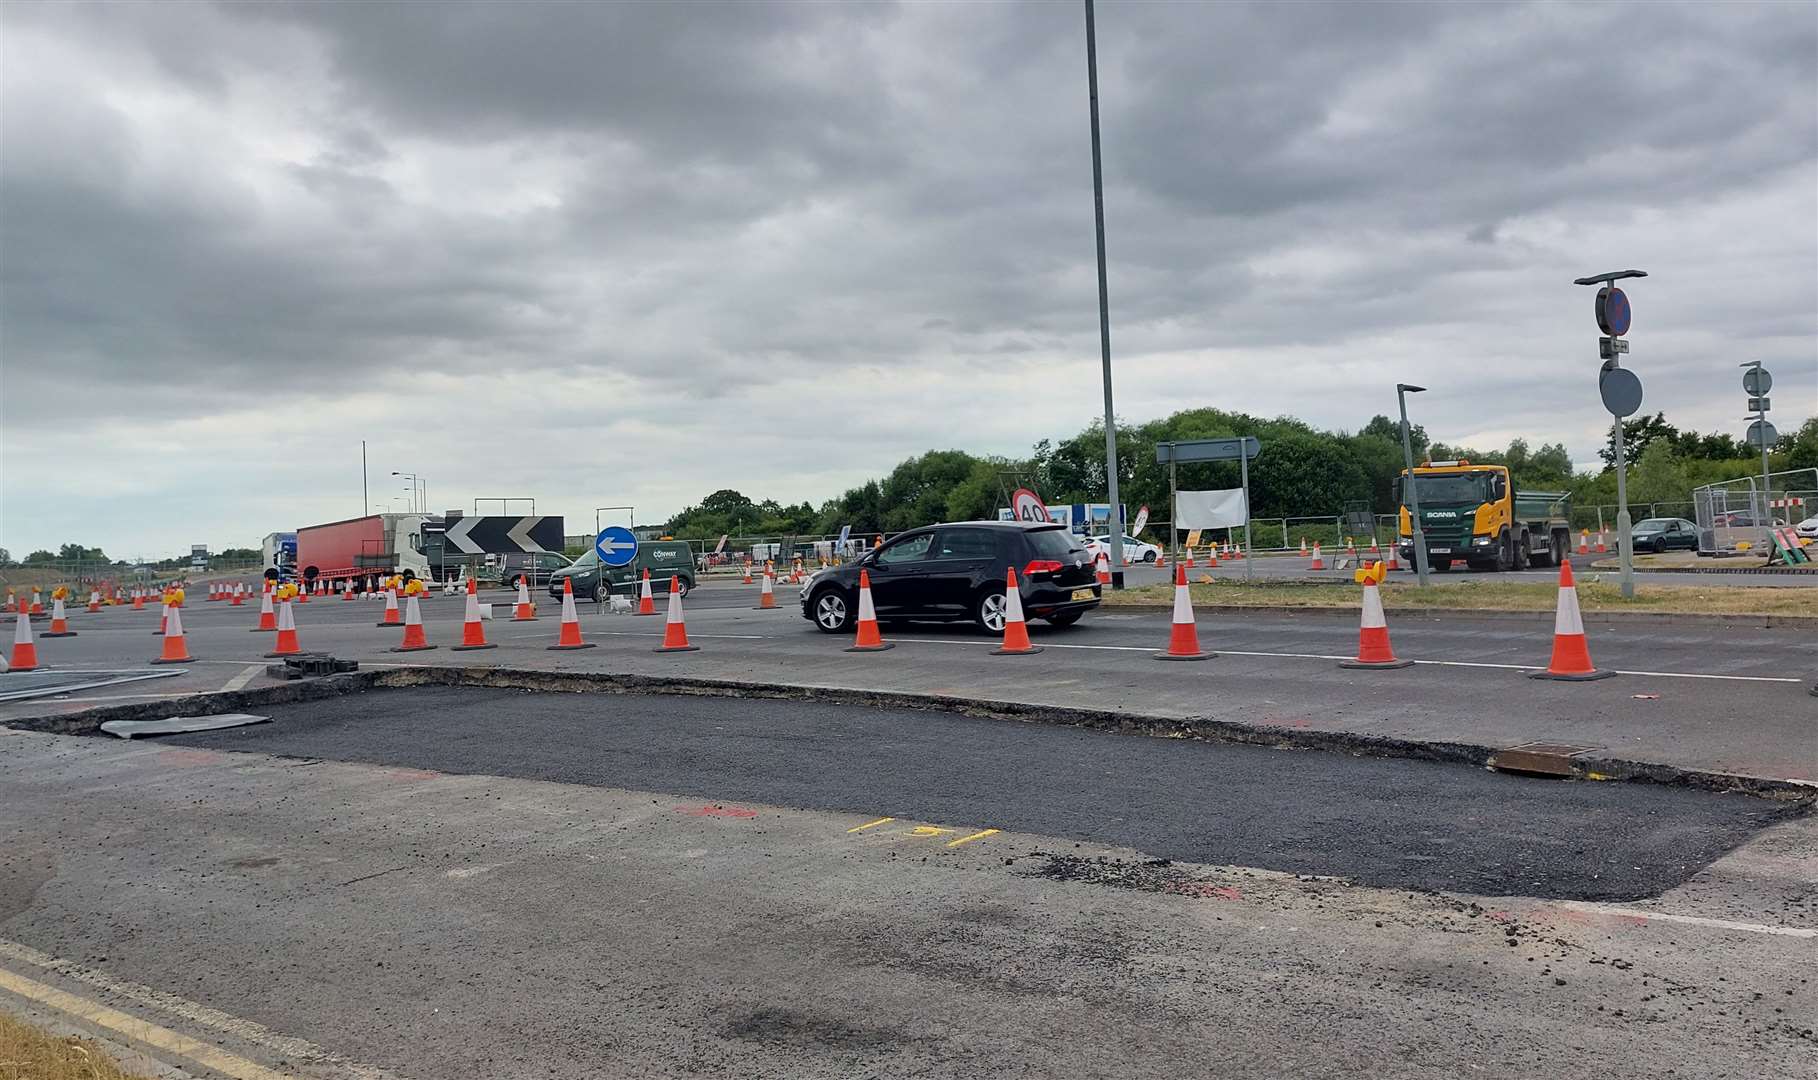 Contractors started work on the A2070 dual carriageway in May